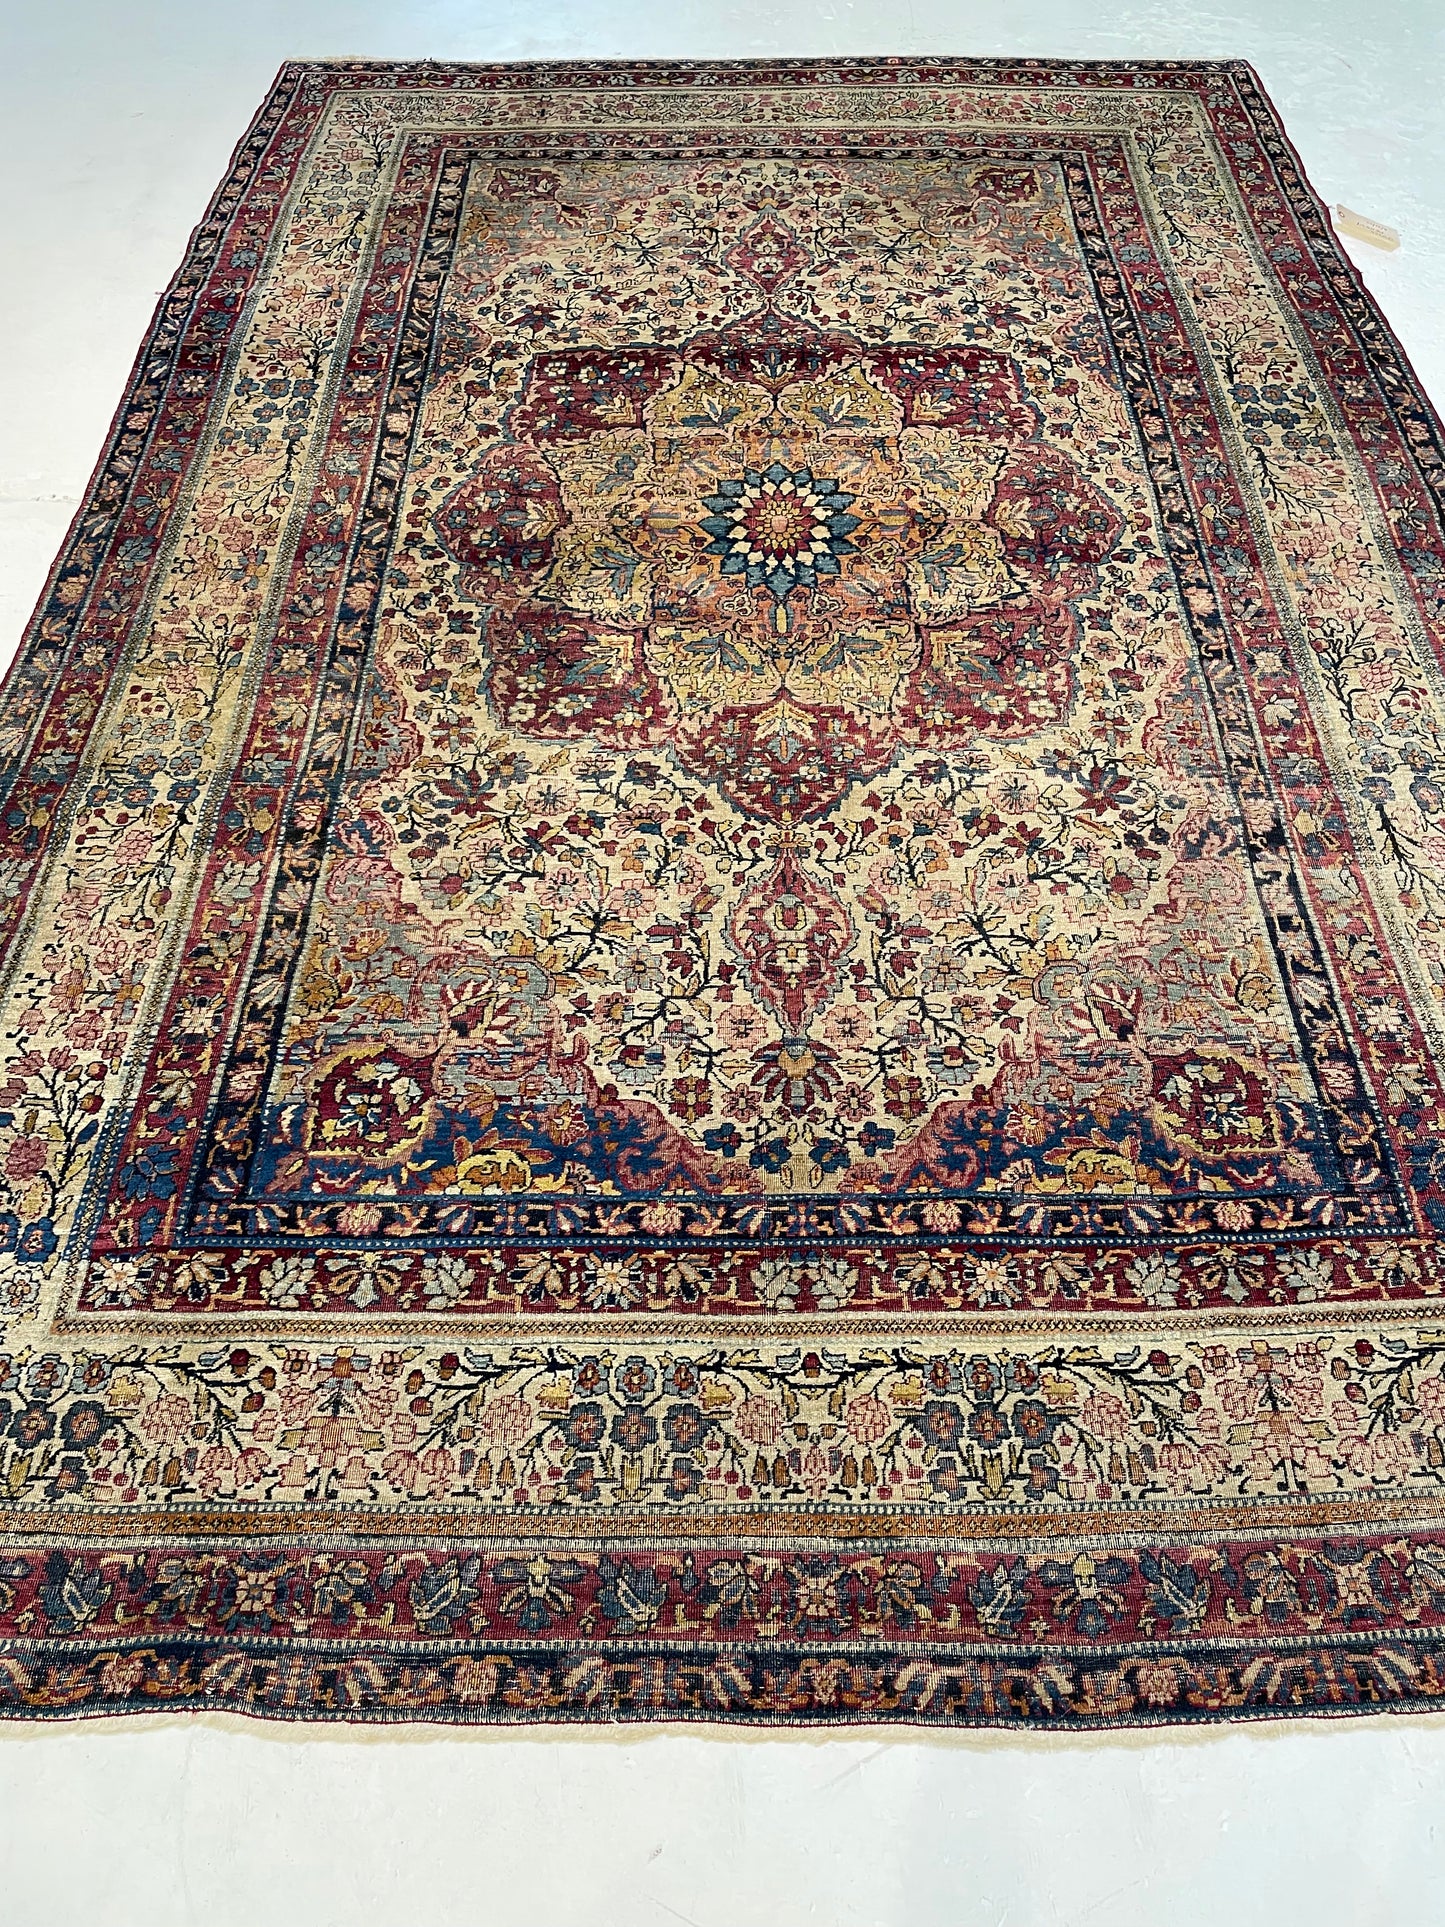 Antique Hand-Knotted Wool Area Rug Farahan Collectible 6'6" x 9'9"